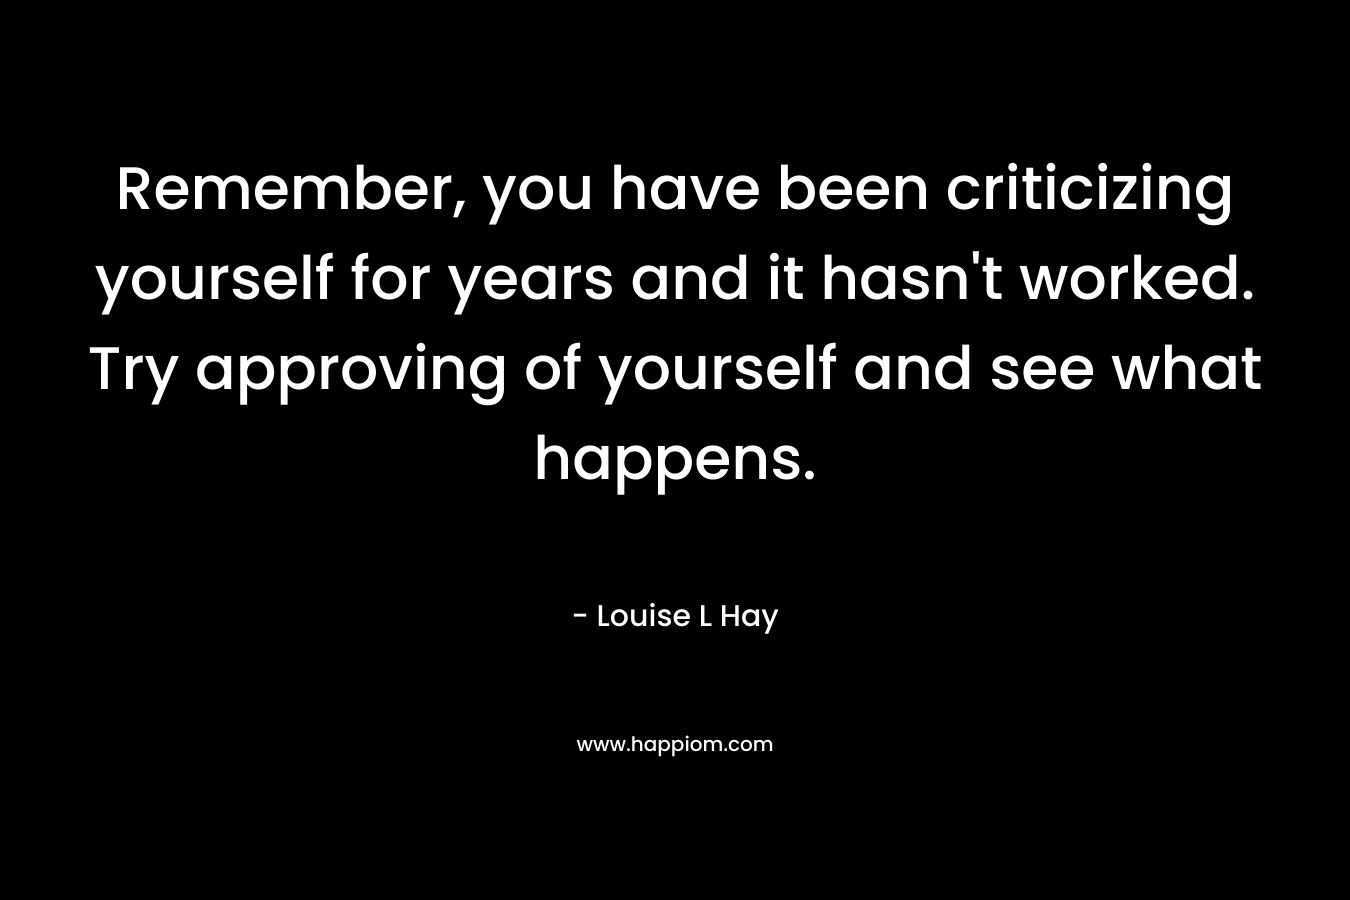 Remember, you have been criticizing yourself for years and it hasn't worked. Try approving of yourself and see what happens.